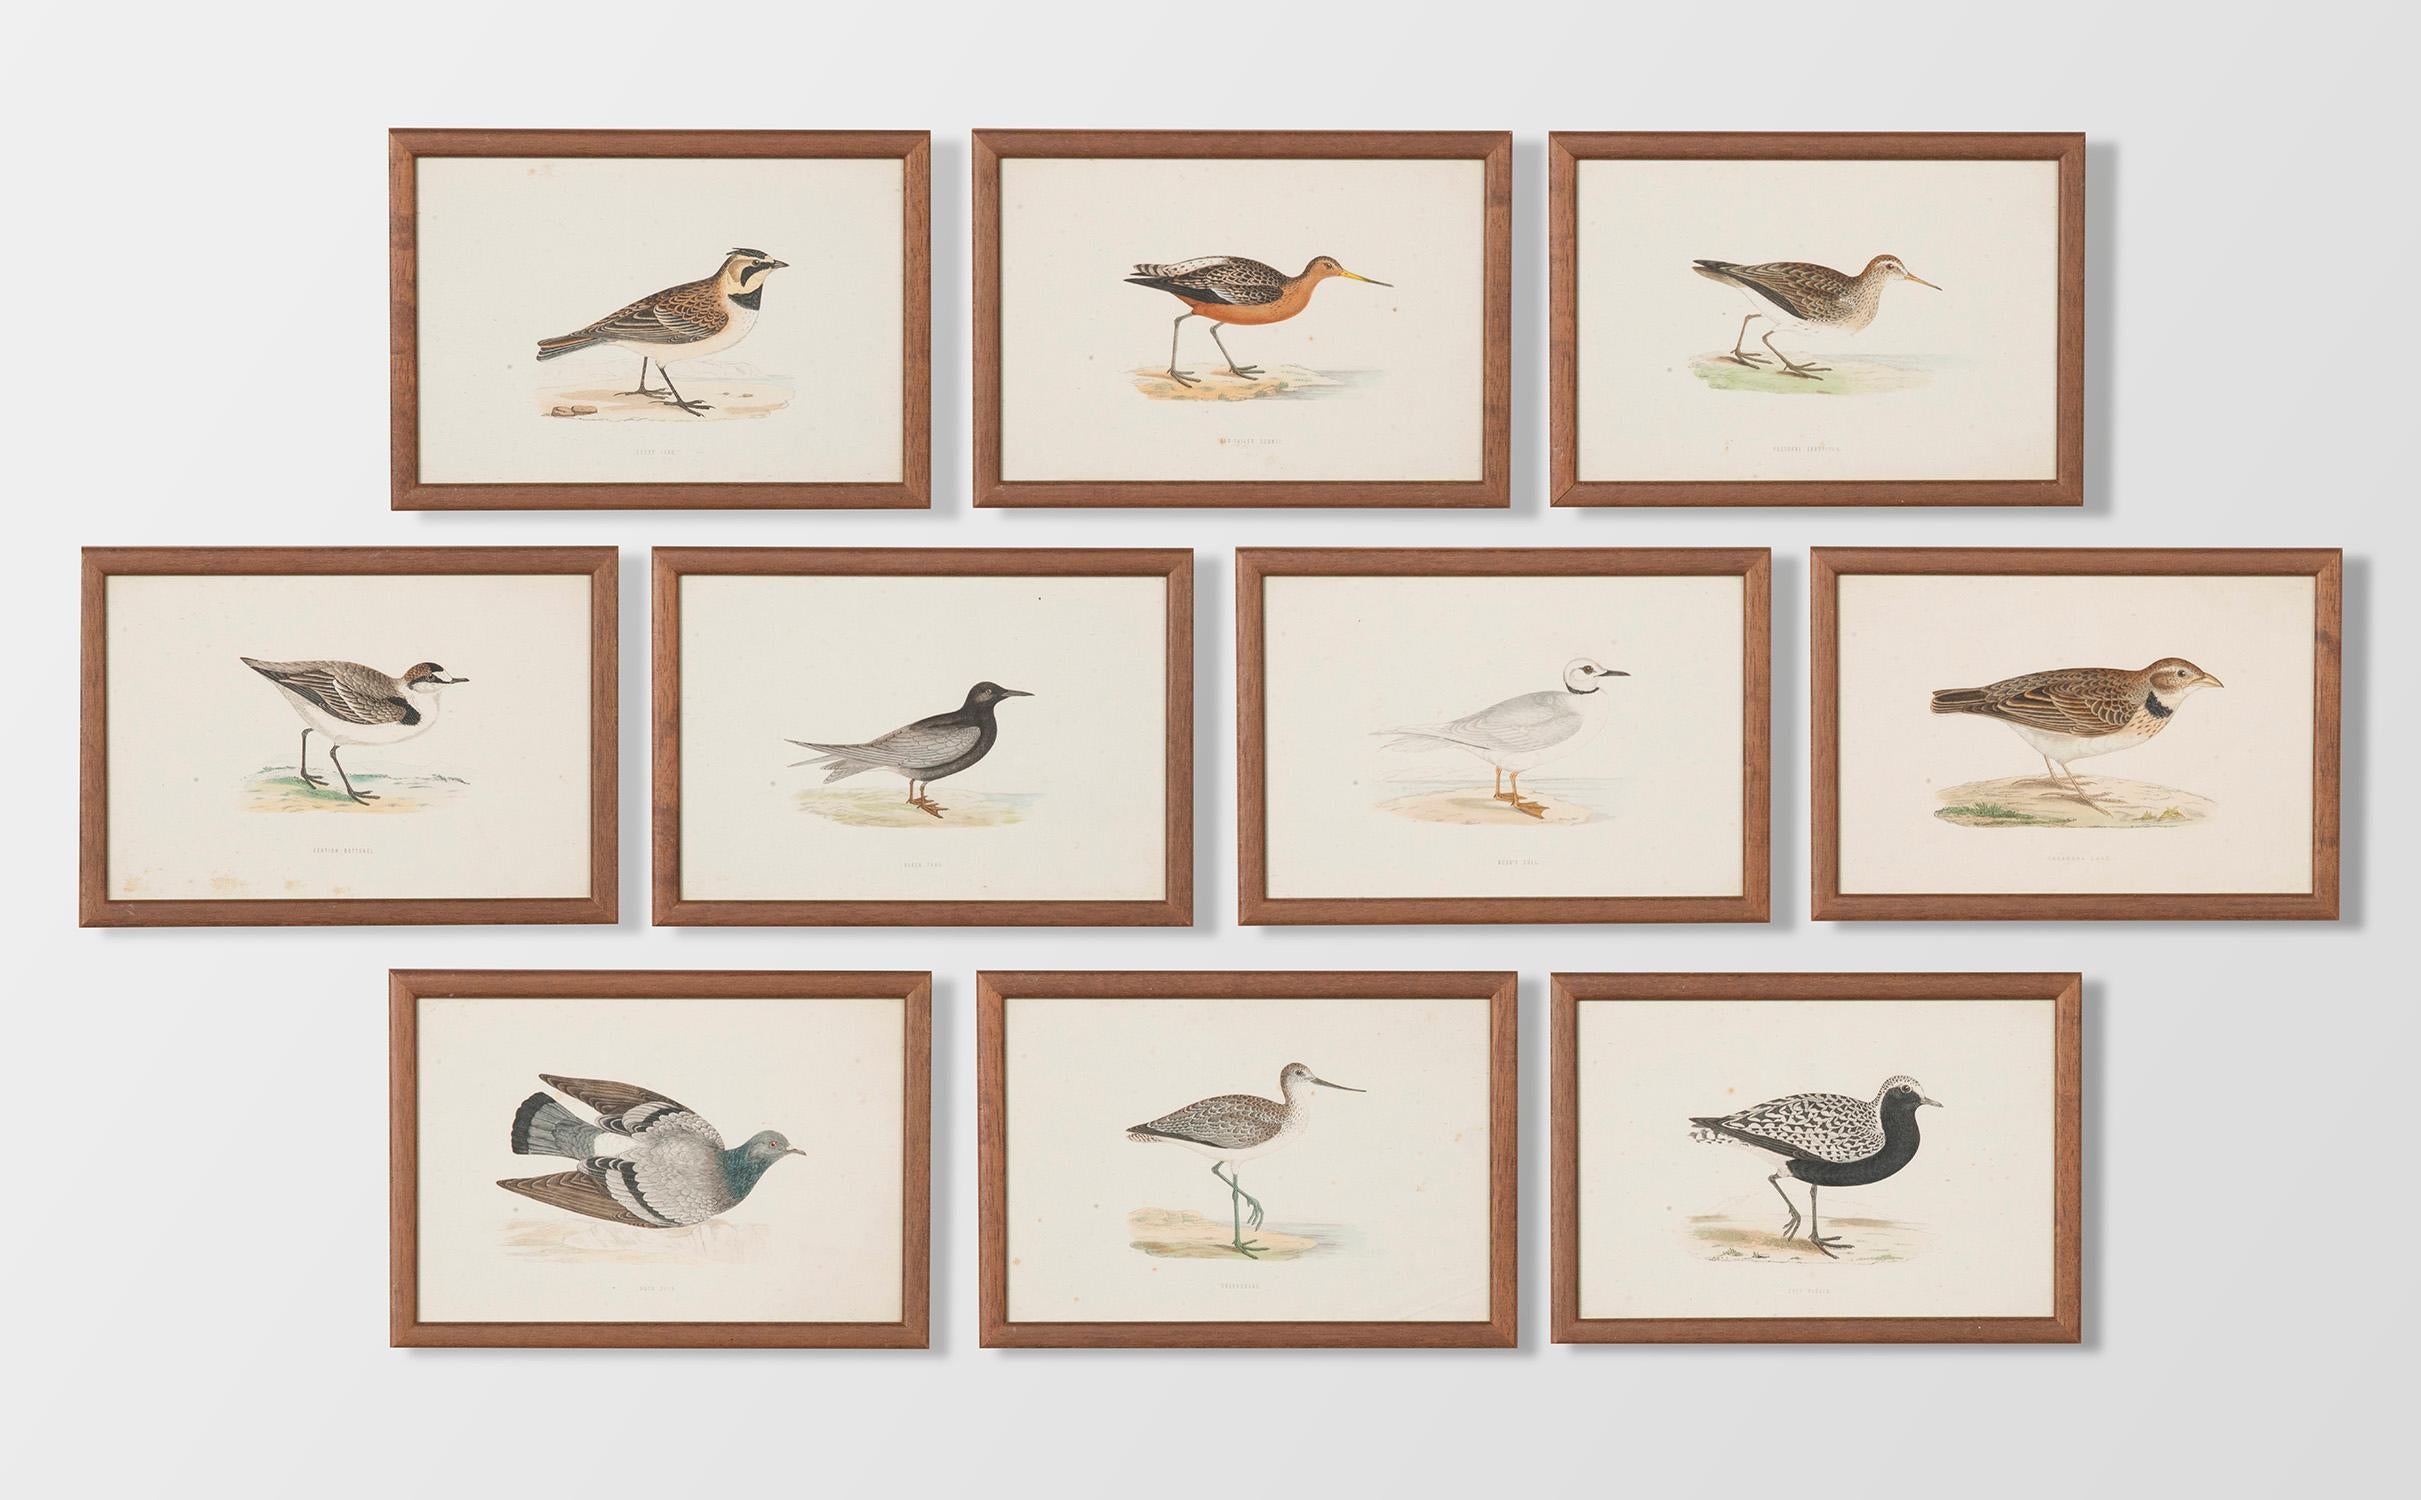 Nice set of 10 antique prints with different coastal birds.
The prints can be dated circa 1900-1920 from England. The prints are framed in a simple wooden frame with non-reflecting glass. The framing work is of recent date.
The prints are probably